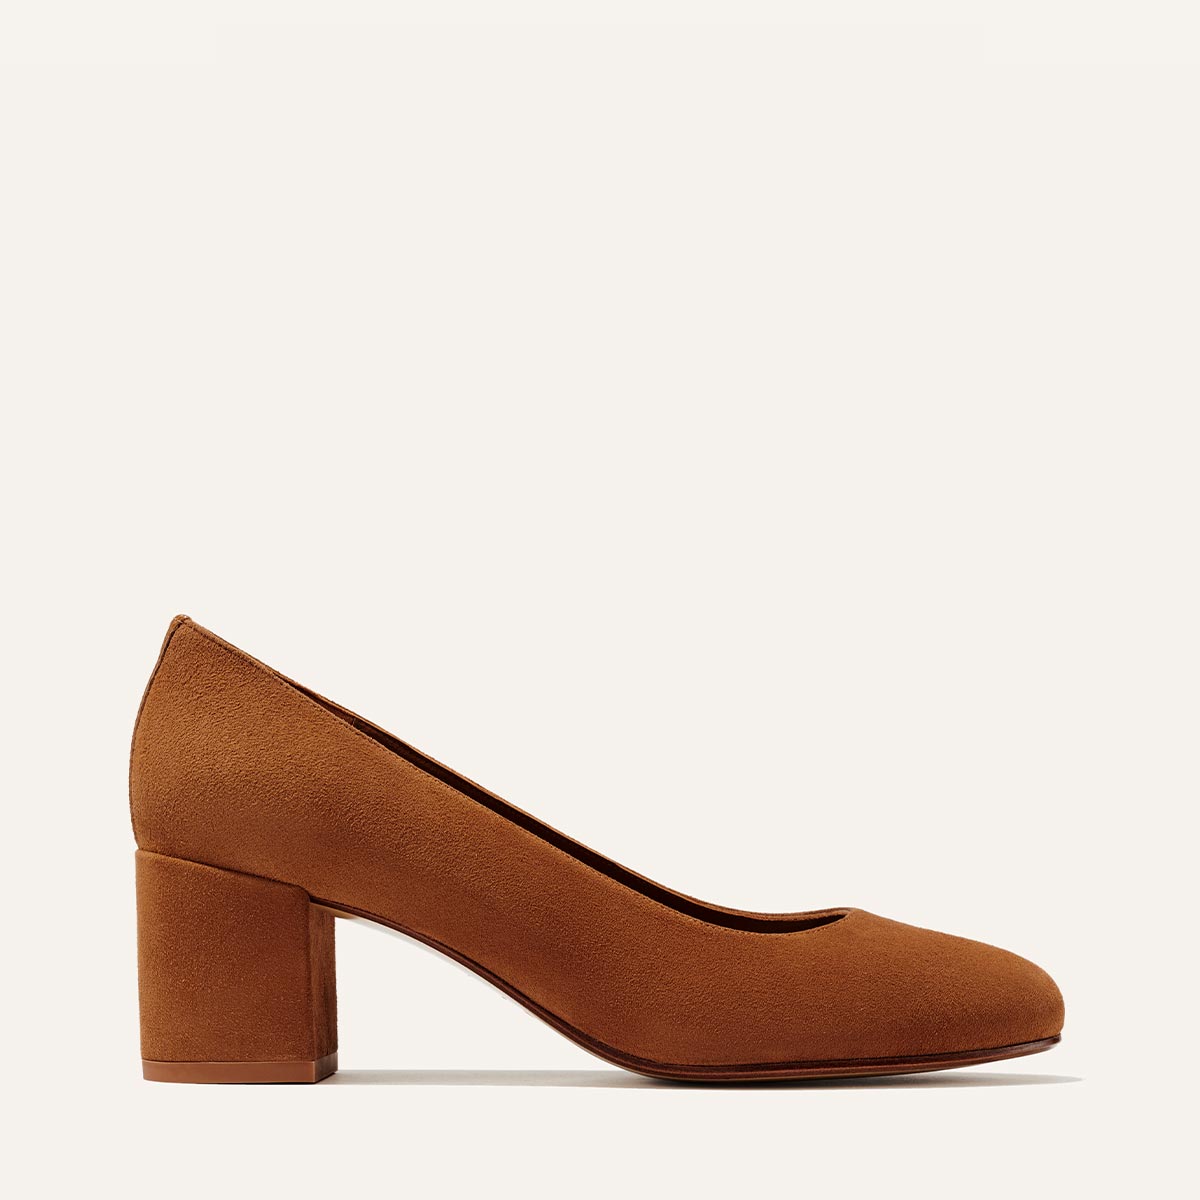 Margaux's classic and comfortable workwear Heel, made in Spain from soft, brown Italian suede